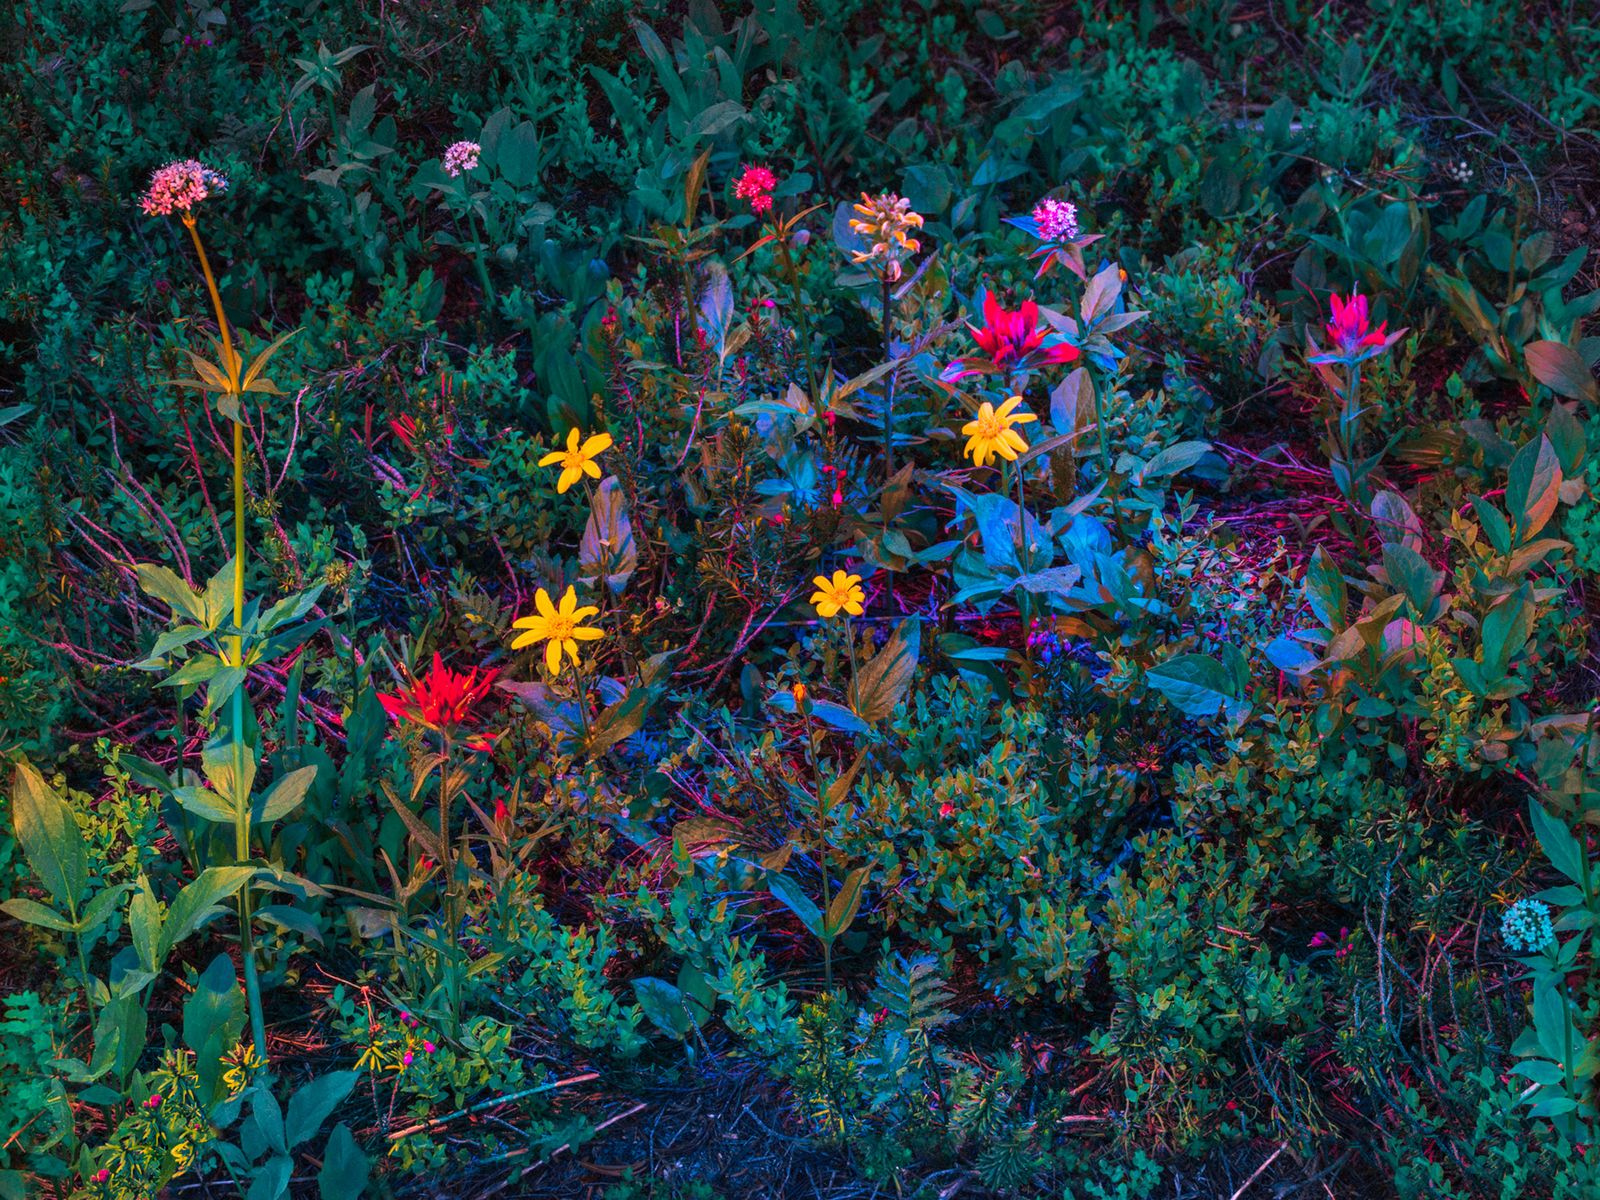 © Christopher Rodriguez - Summer Flowers/Radioactive decay can be beautiful.